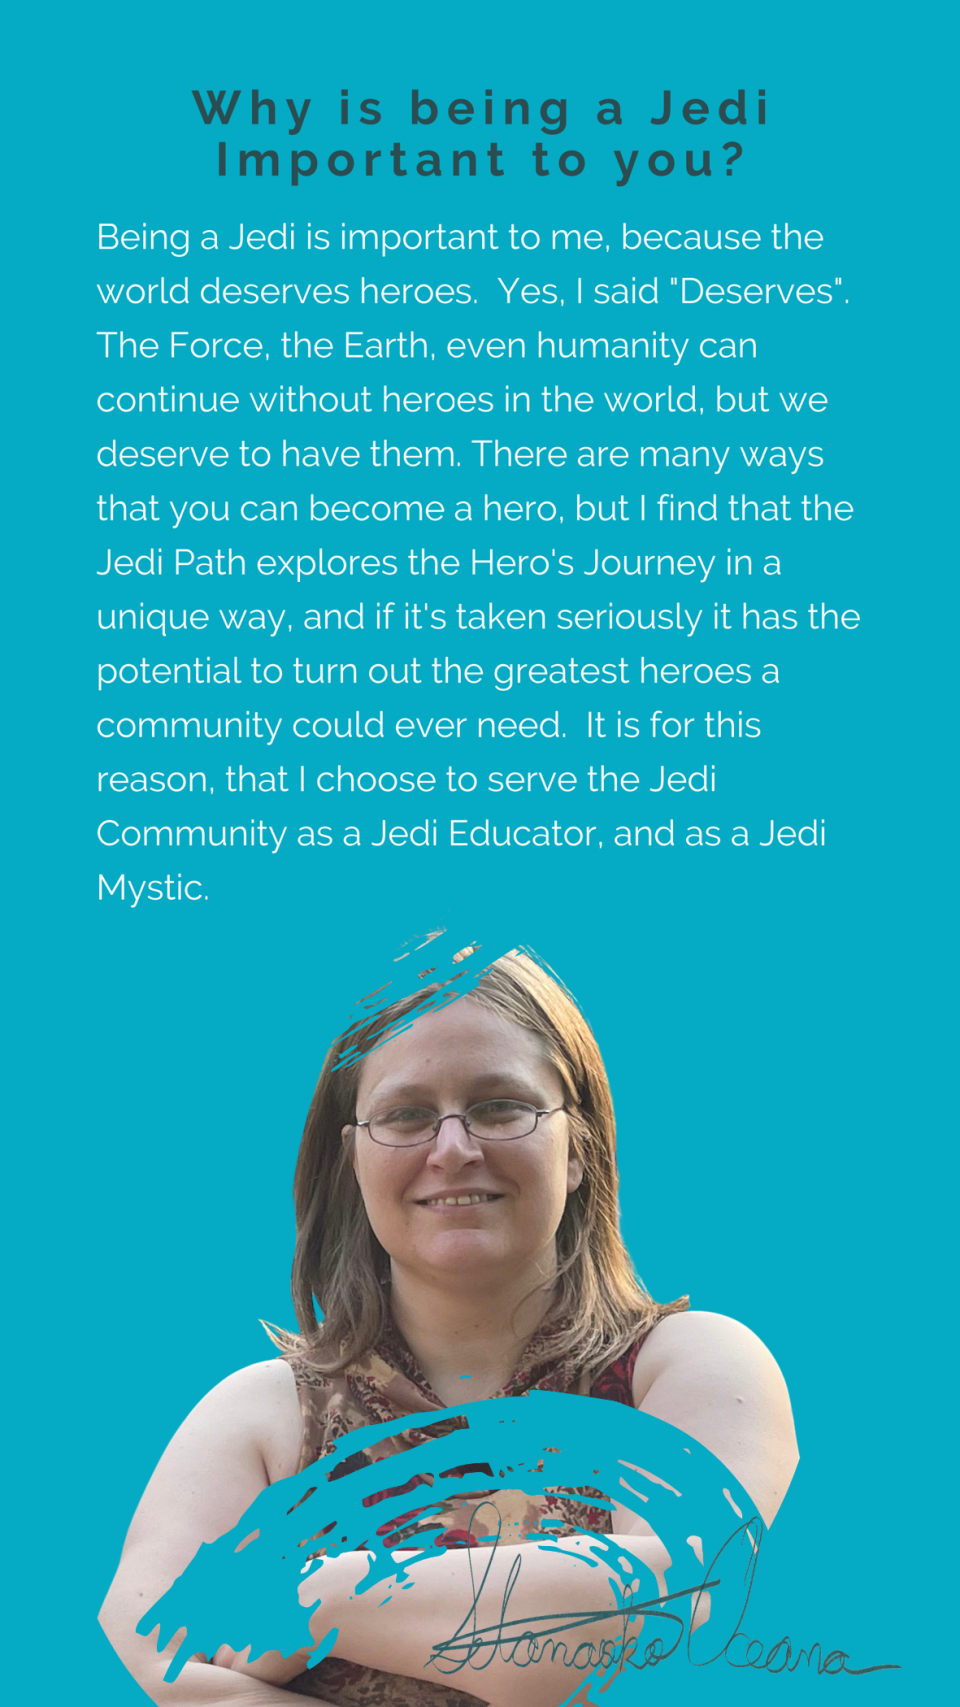 I'd love to see your answers to the question "Why is being a Jedi important to you?" :)